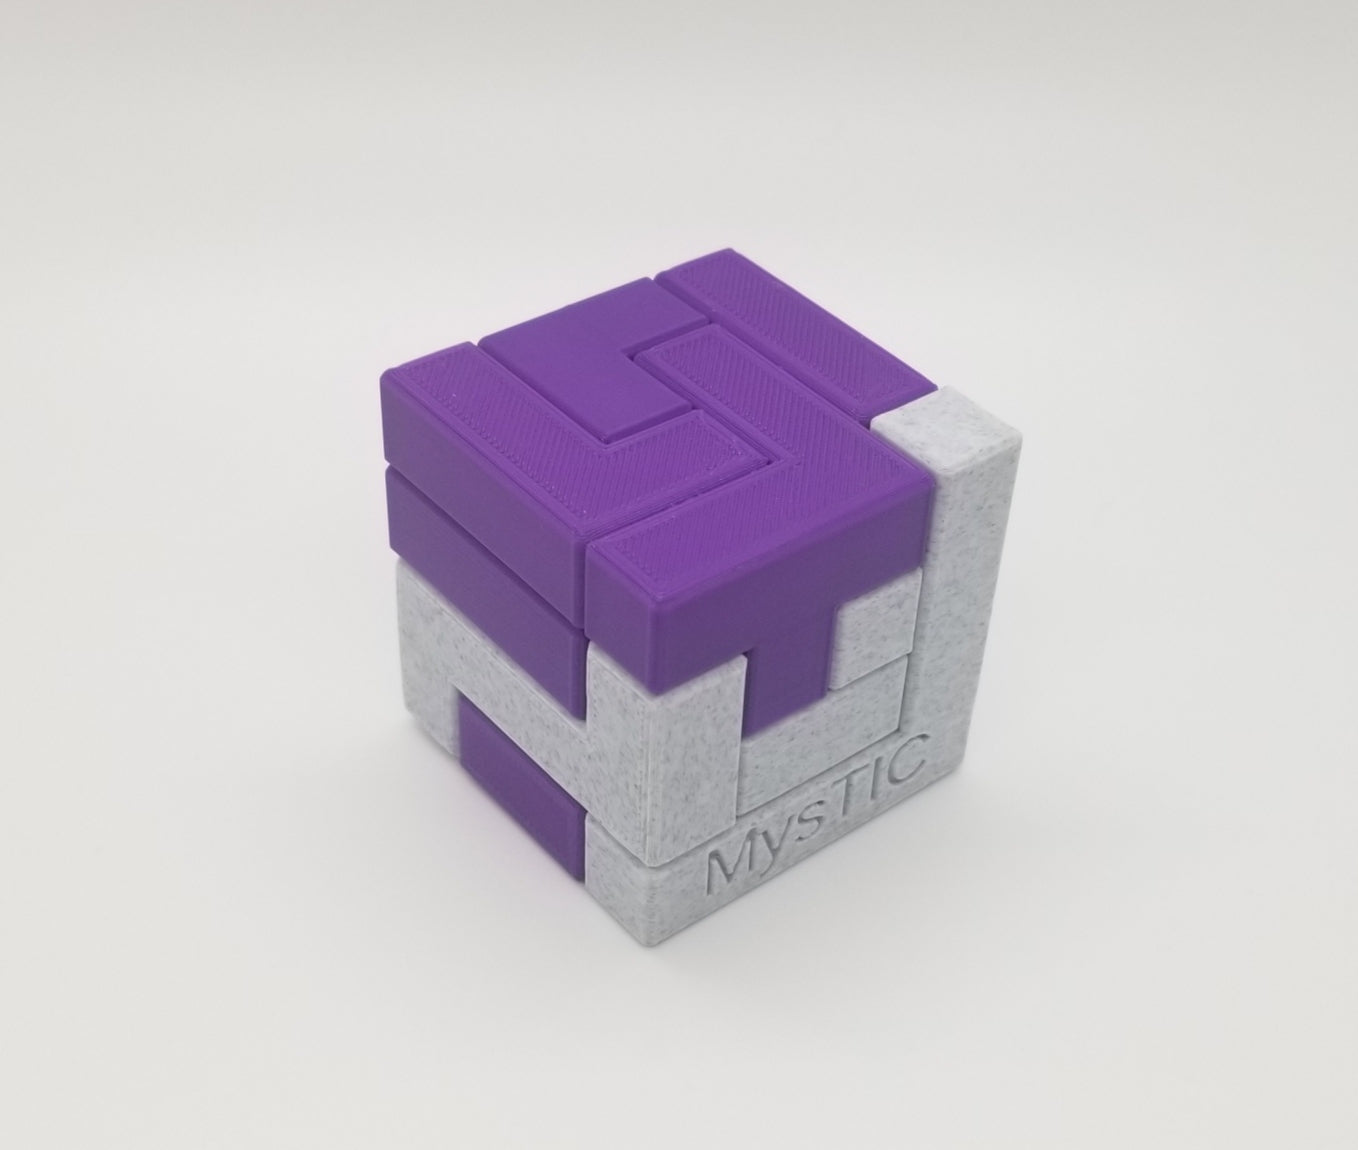 Download 3D Printable STL Files for the 6 Favorite Turning Interlocking Cube Puzzles